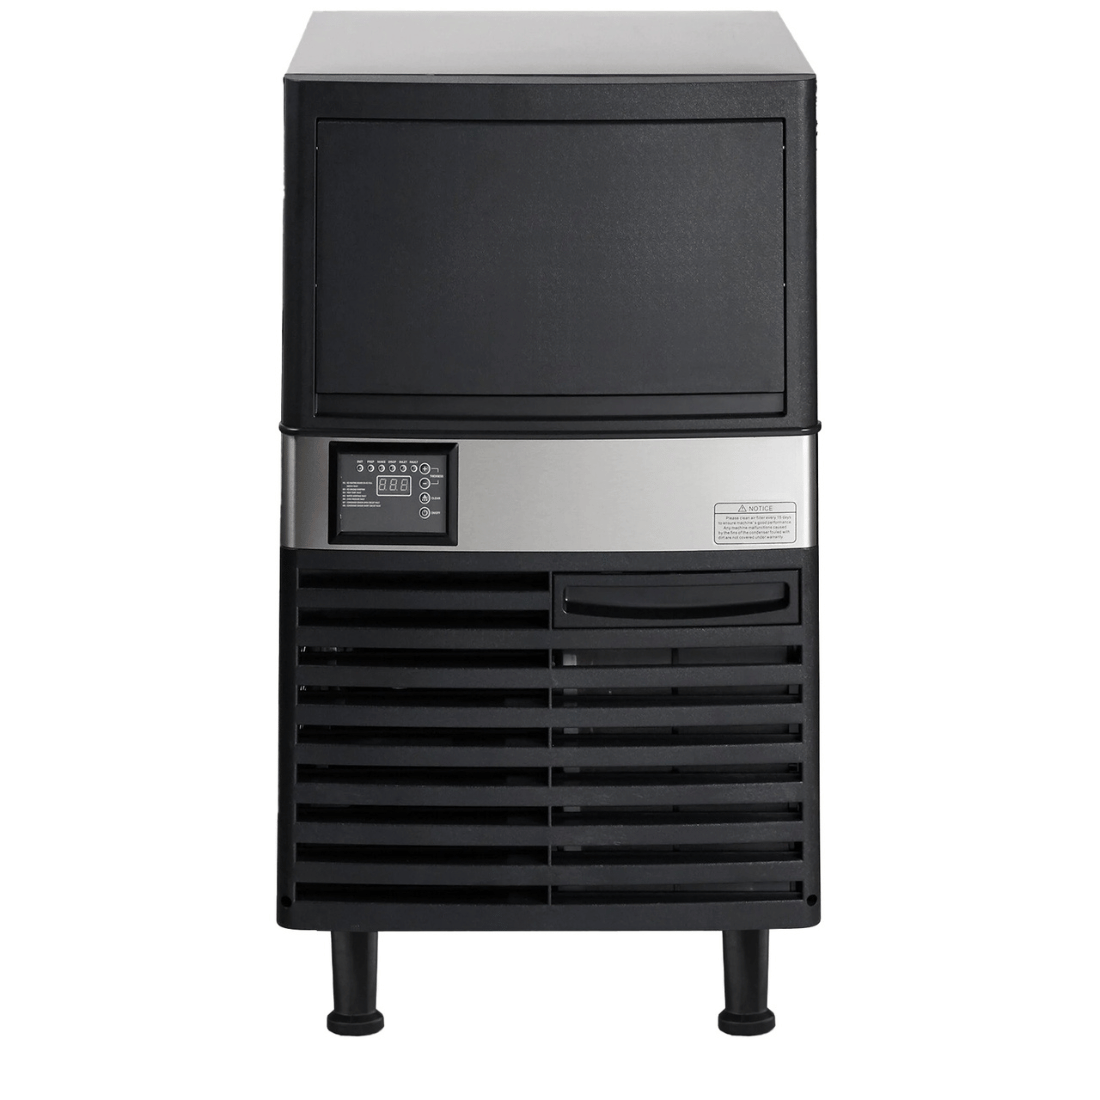 SN-120P Under Bench Ice Maker - Air Cooled